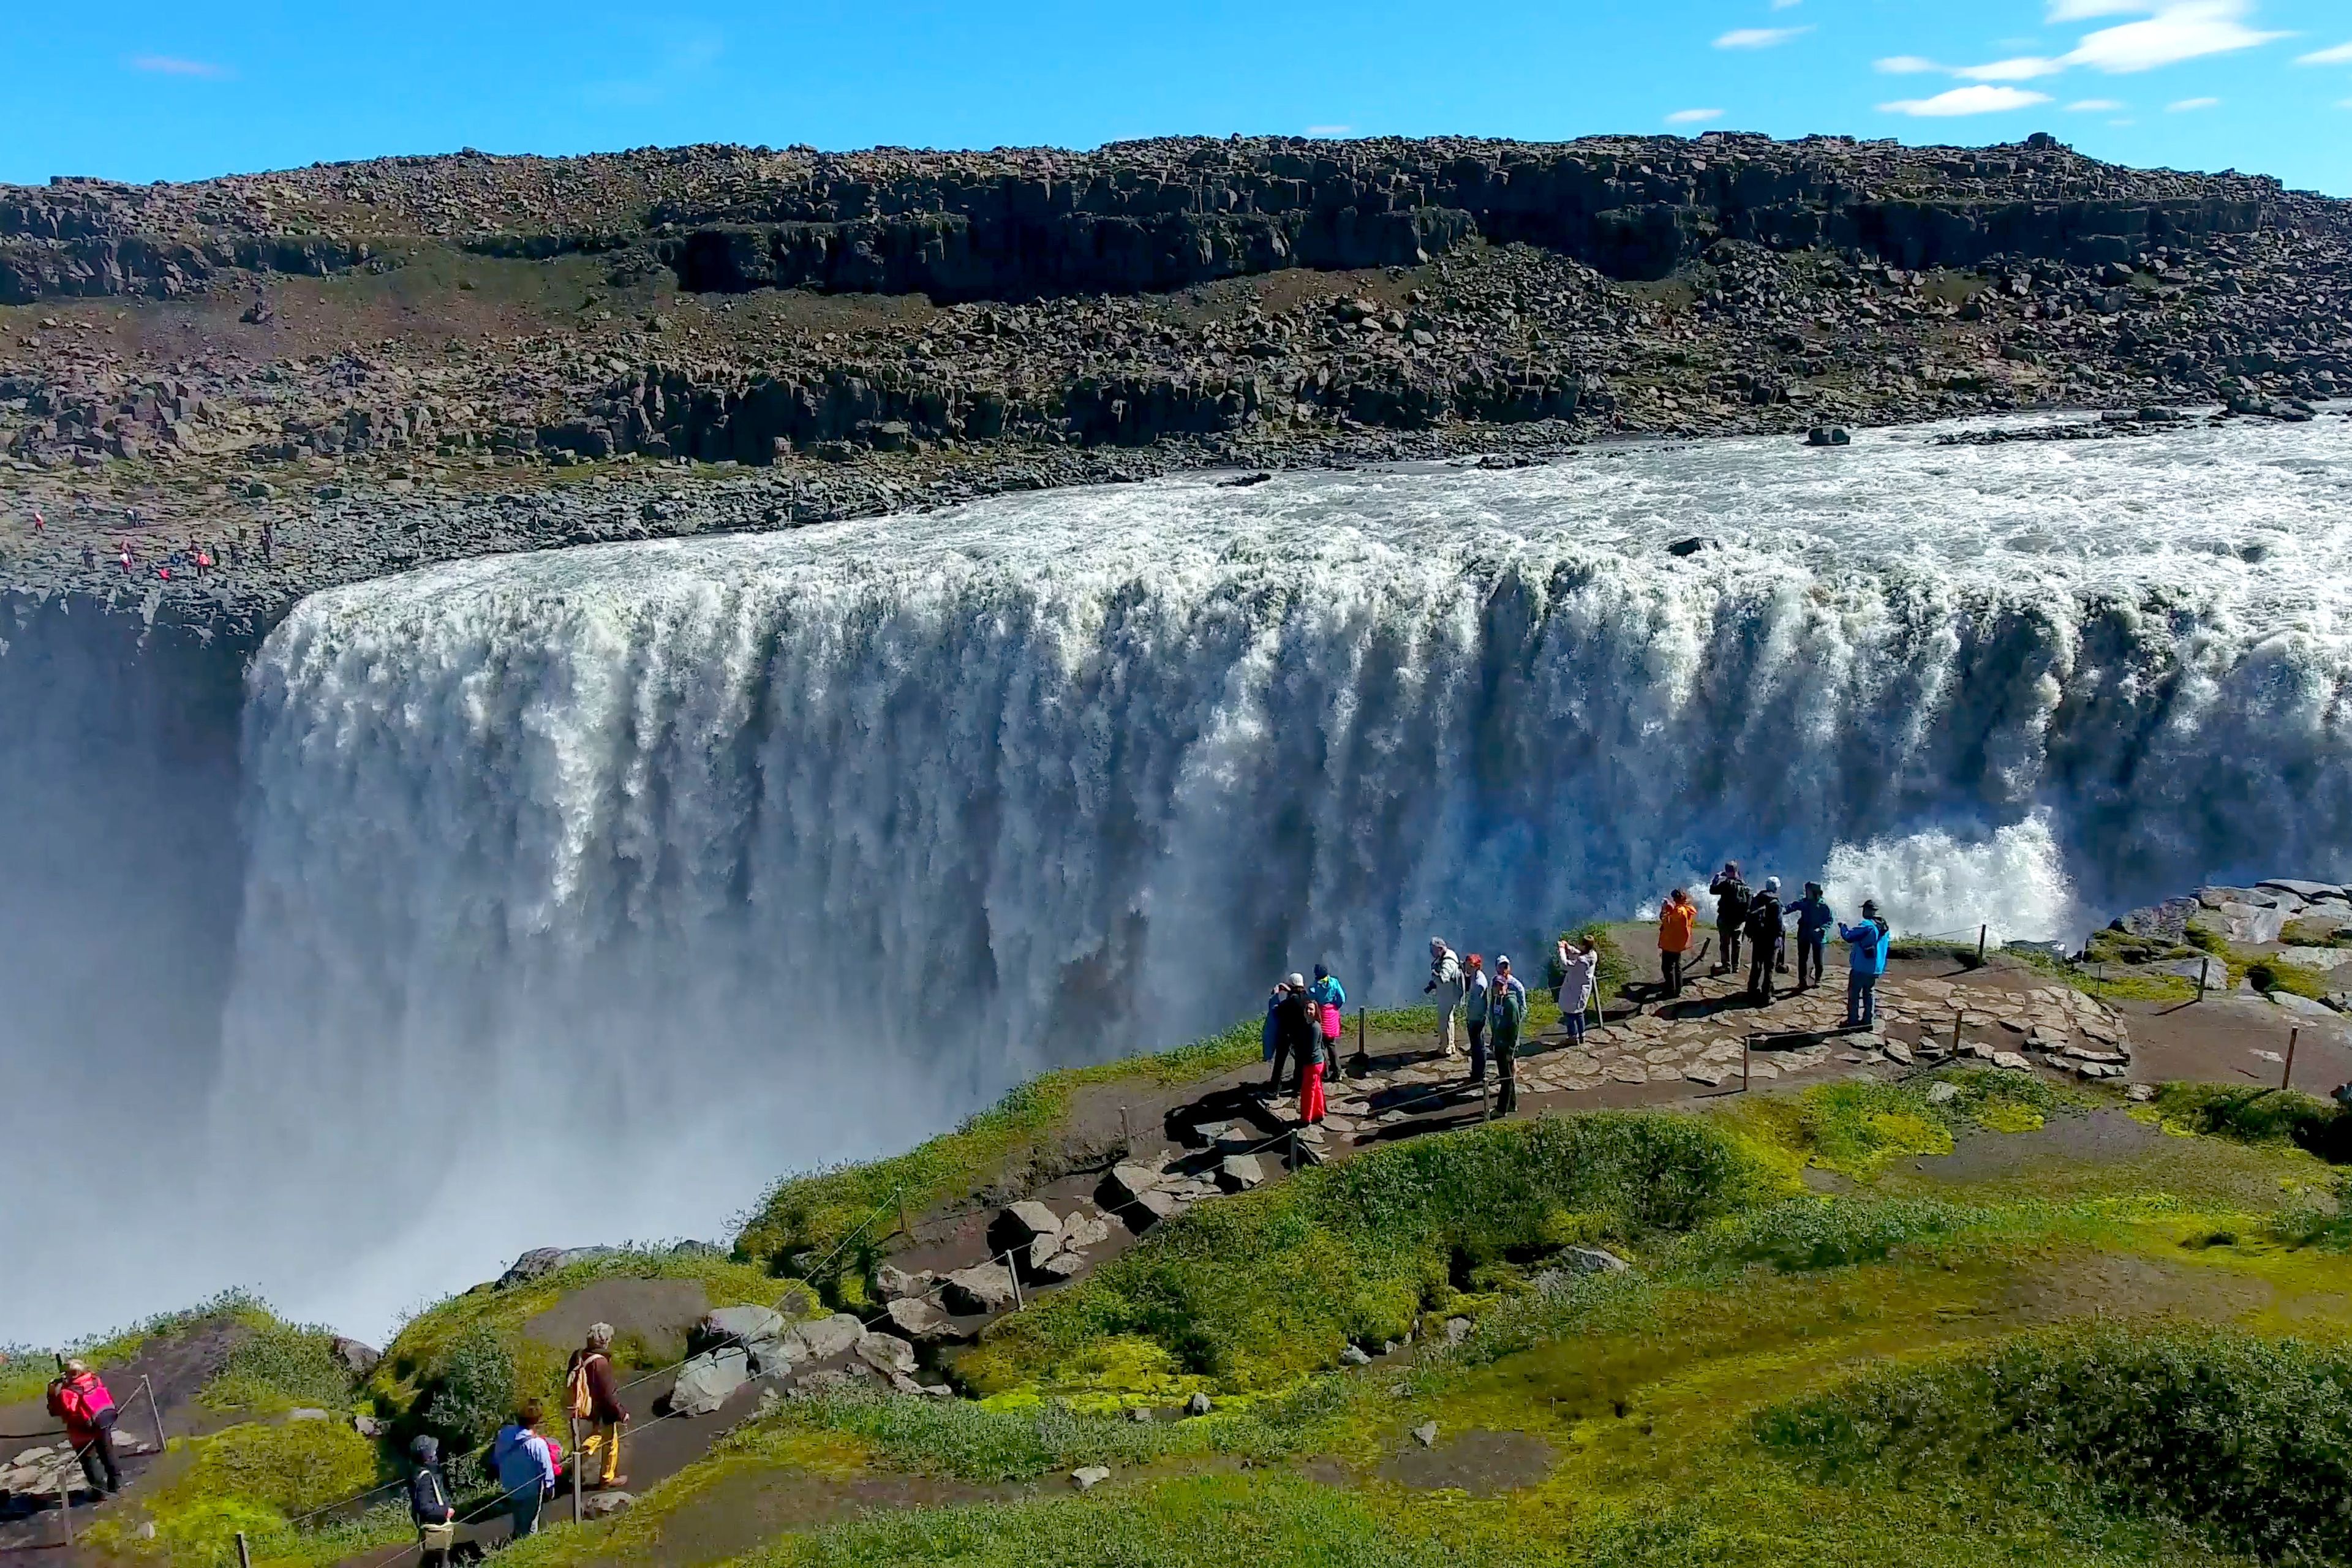 Visitors standing in awe of the mighty Dettifoss waterfall, Europe's most powerful waterfall, captivated by its intense beauty and grandeur.